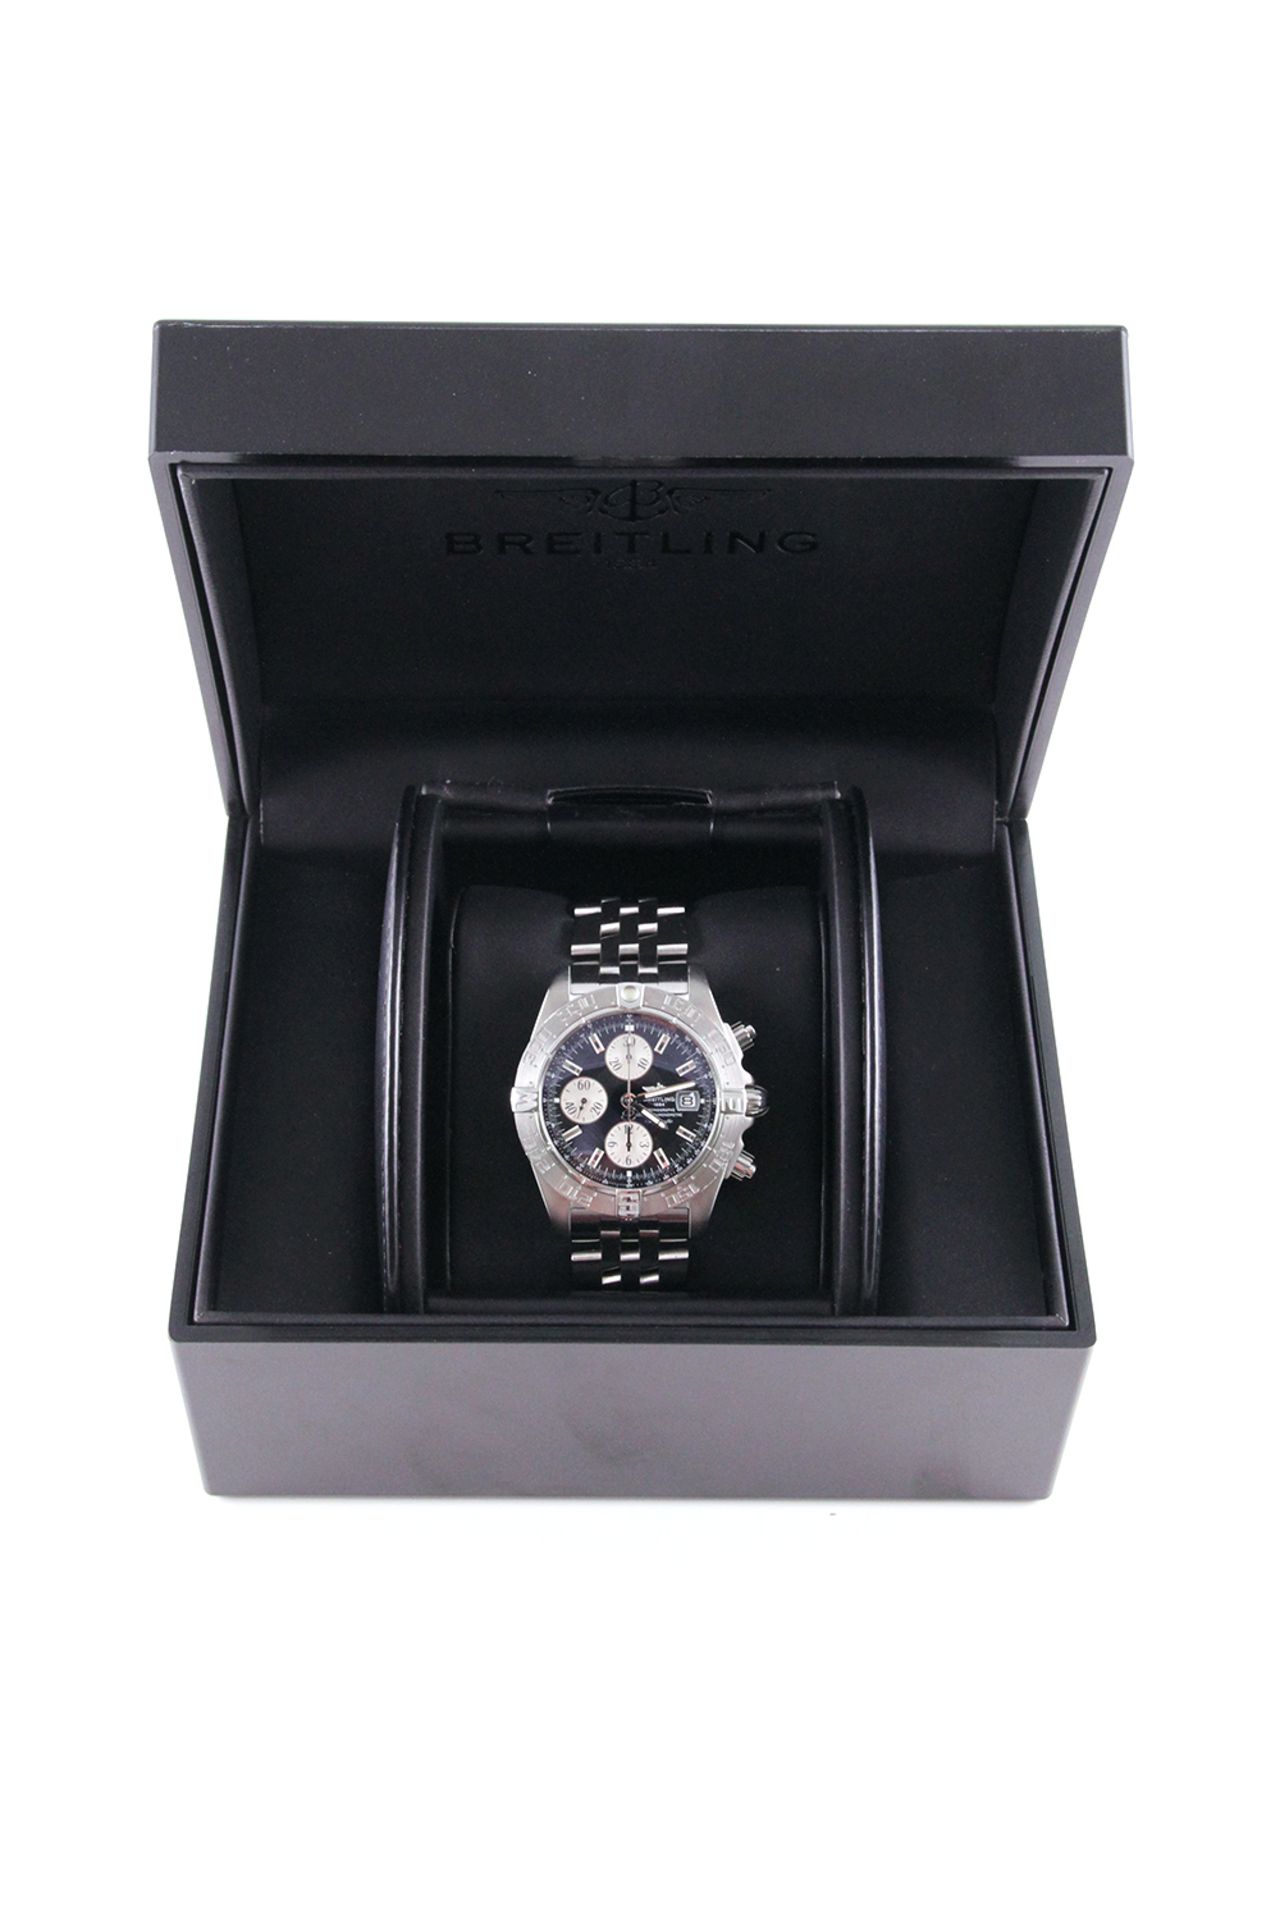 BREITLING Galactic II Chronograph Automatic A13364 - Image 2 of 3